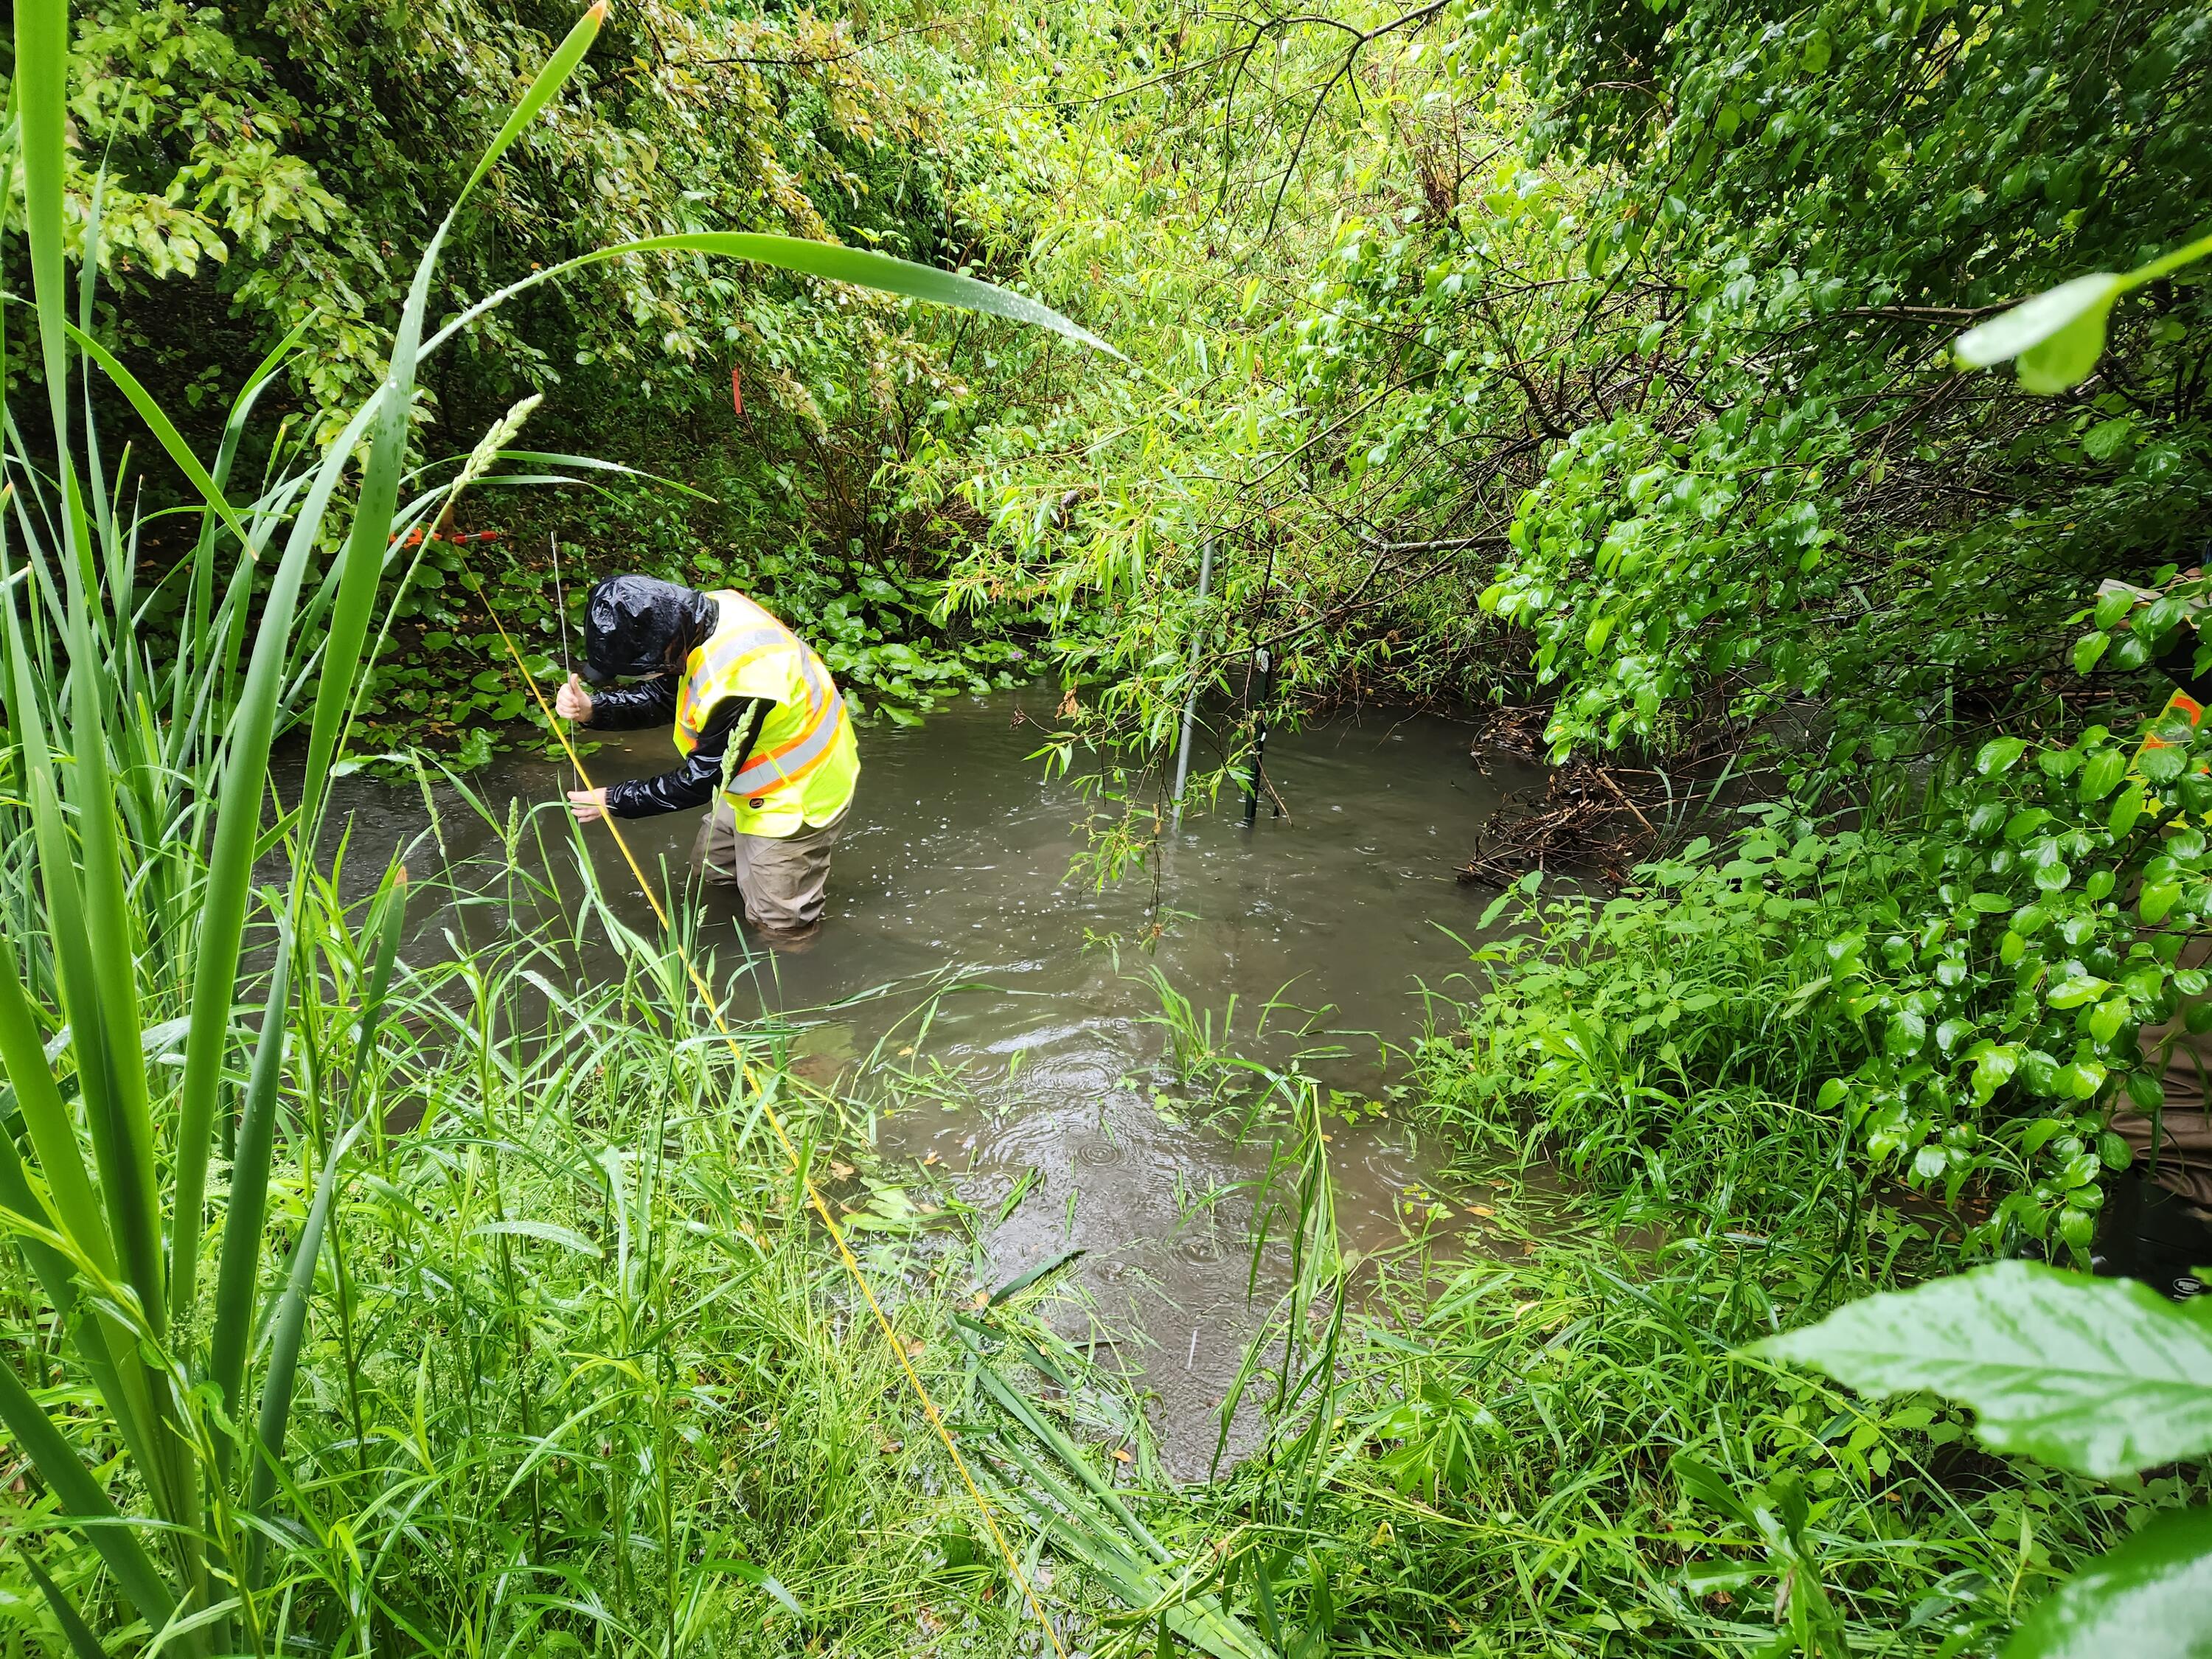 Co-op student in a yellow vest testing pond water